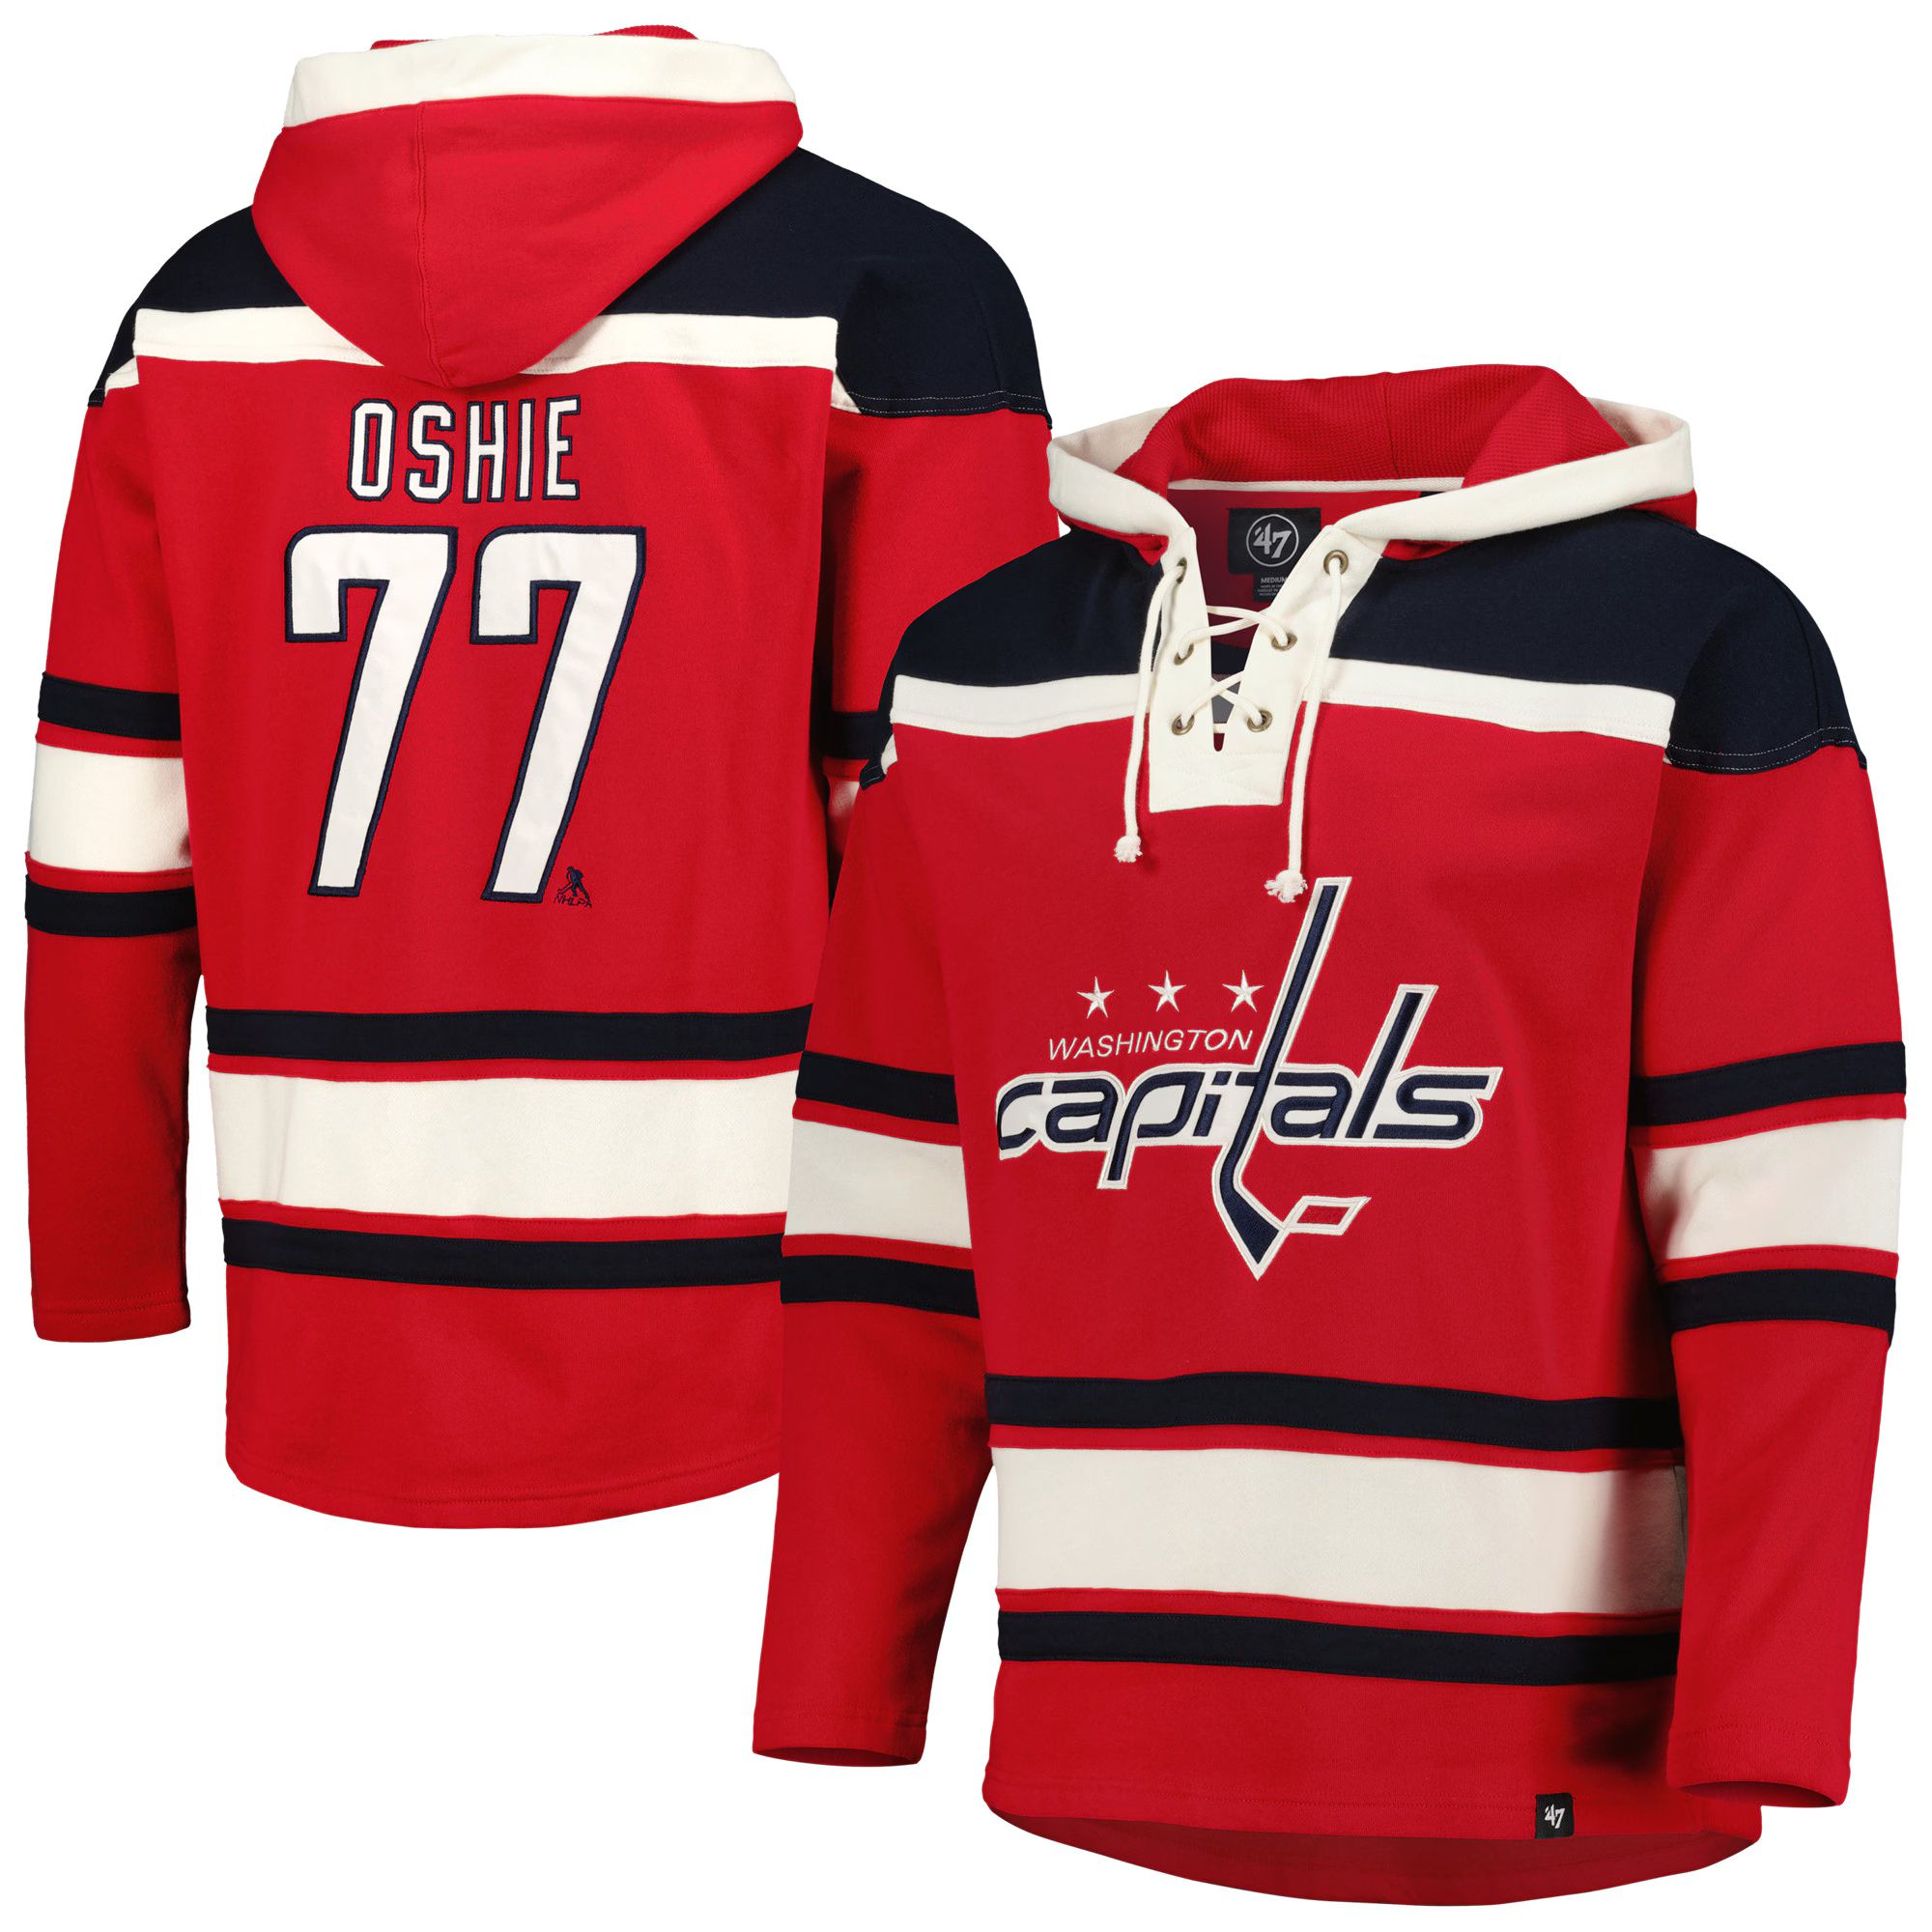 TJ Oshie Washington Capitals '47 Player Lacer Pullover Hoodie - Red | Fanatics